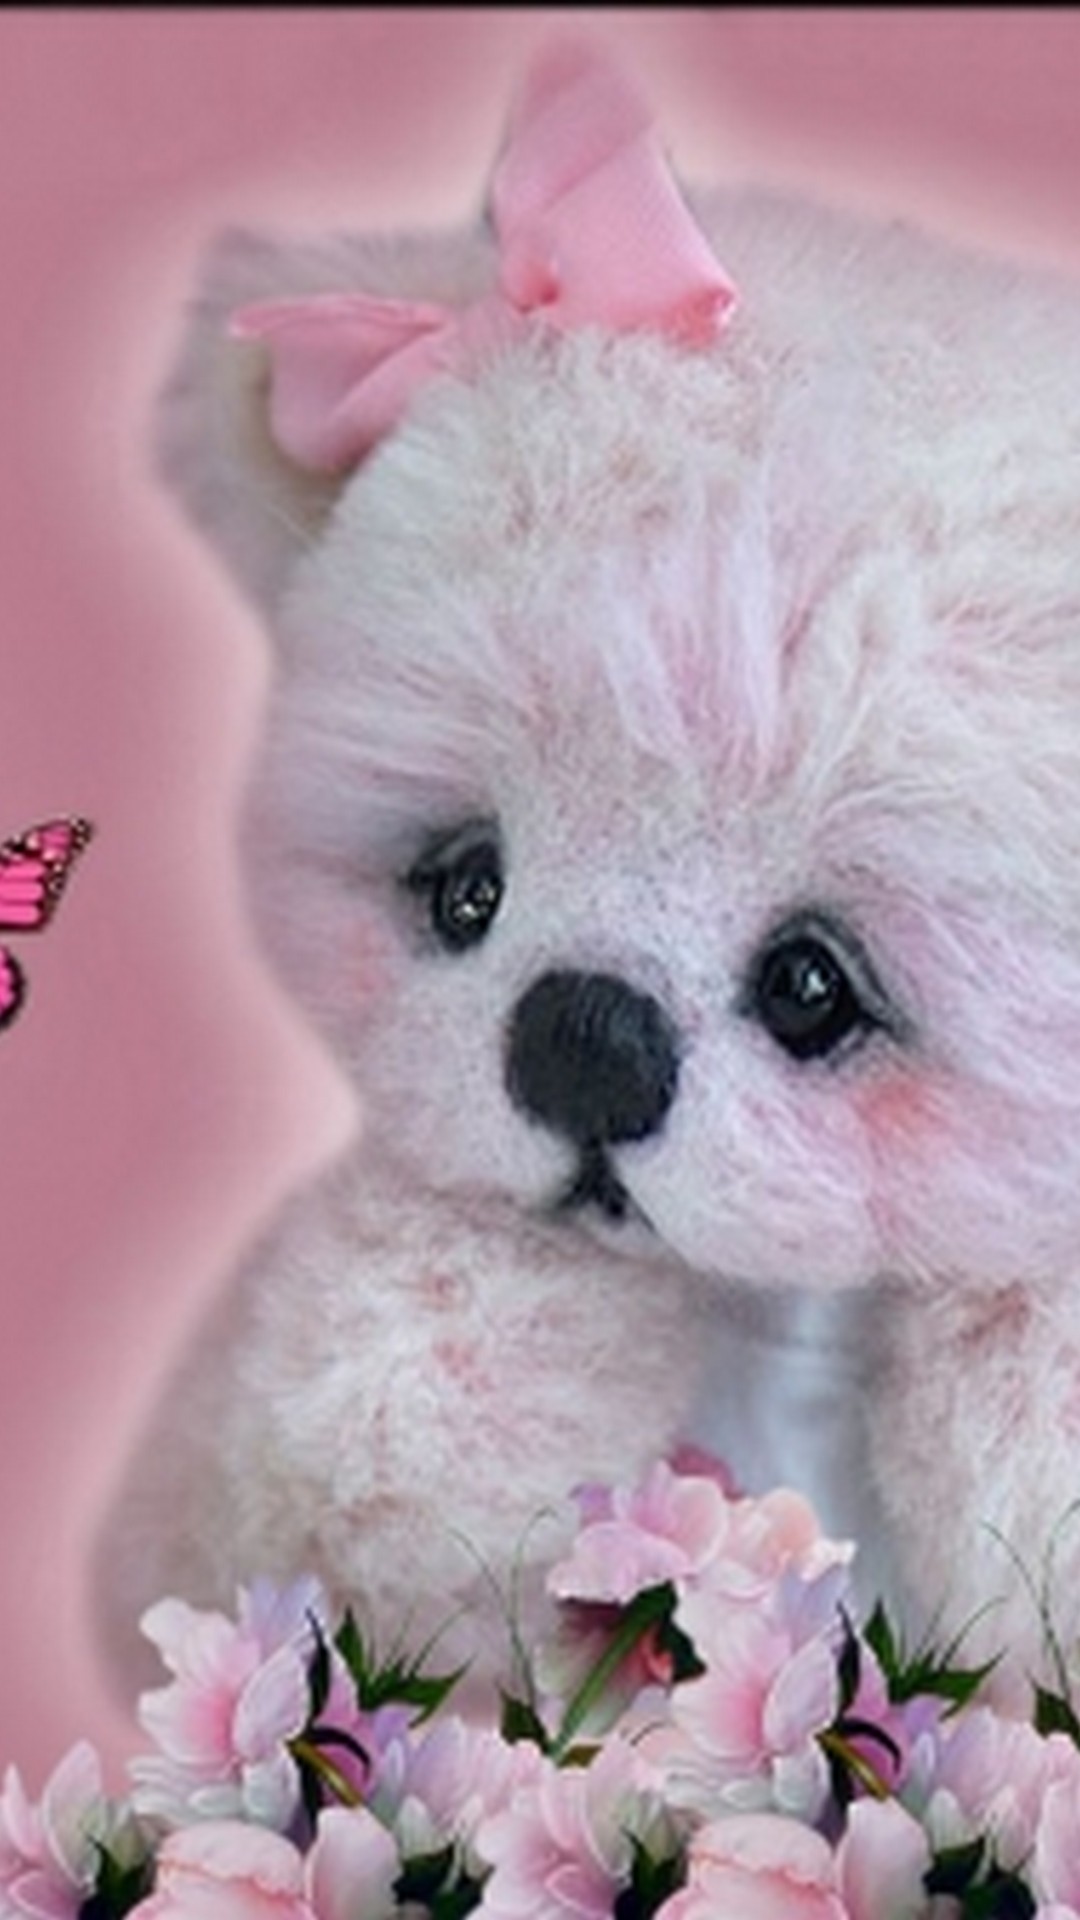 Wallpaper Cute Teddy Bear Android With Image Resolution - Home Screen Cute Teddy - HD Wallpaper 